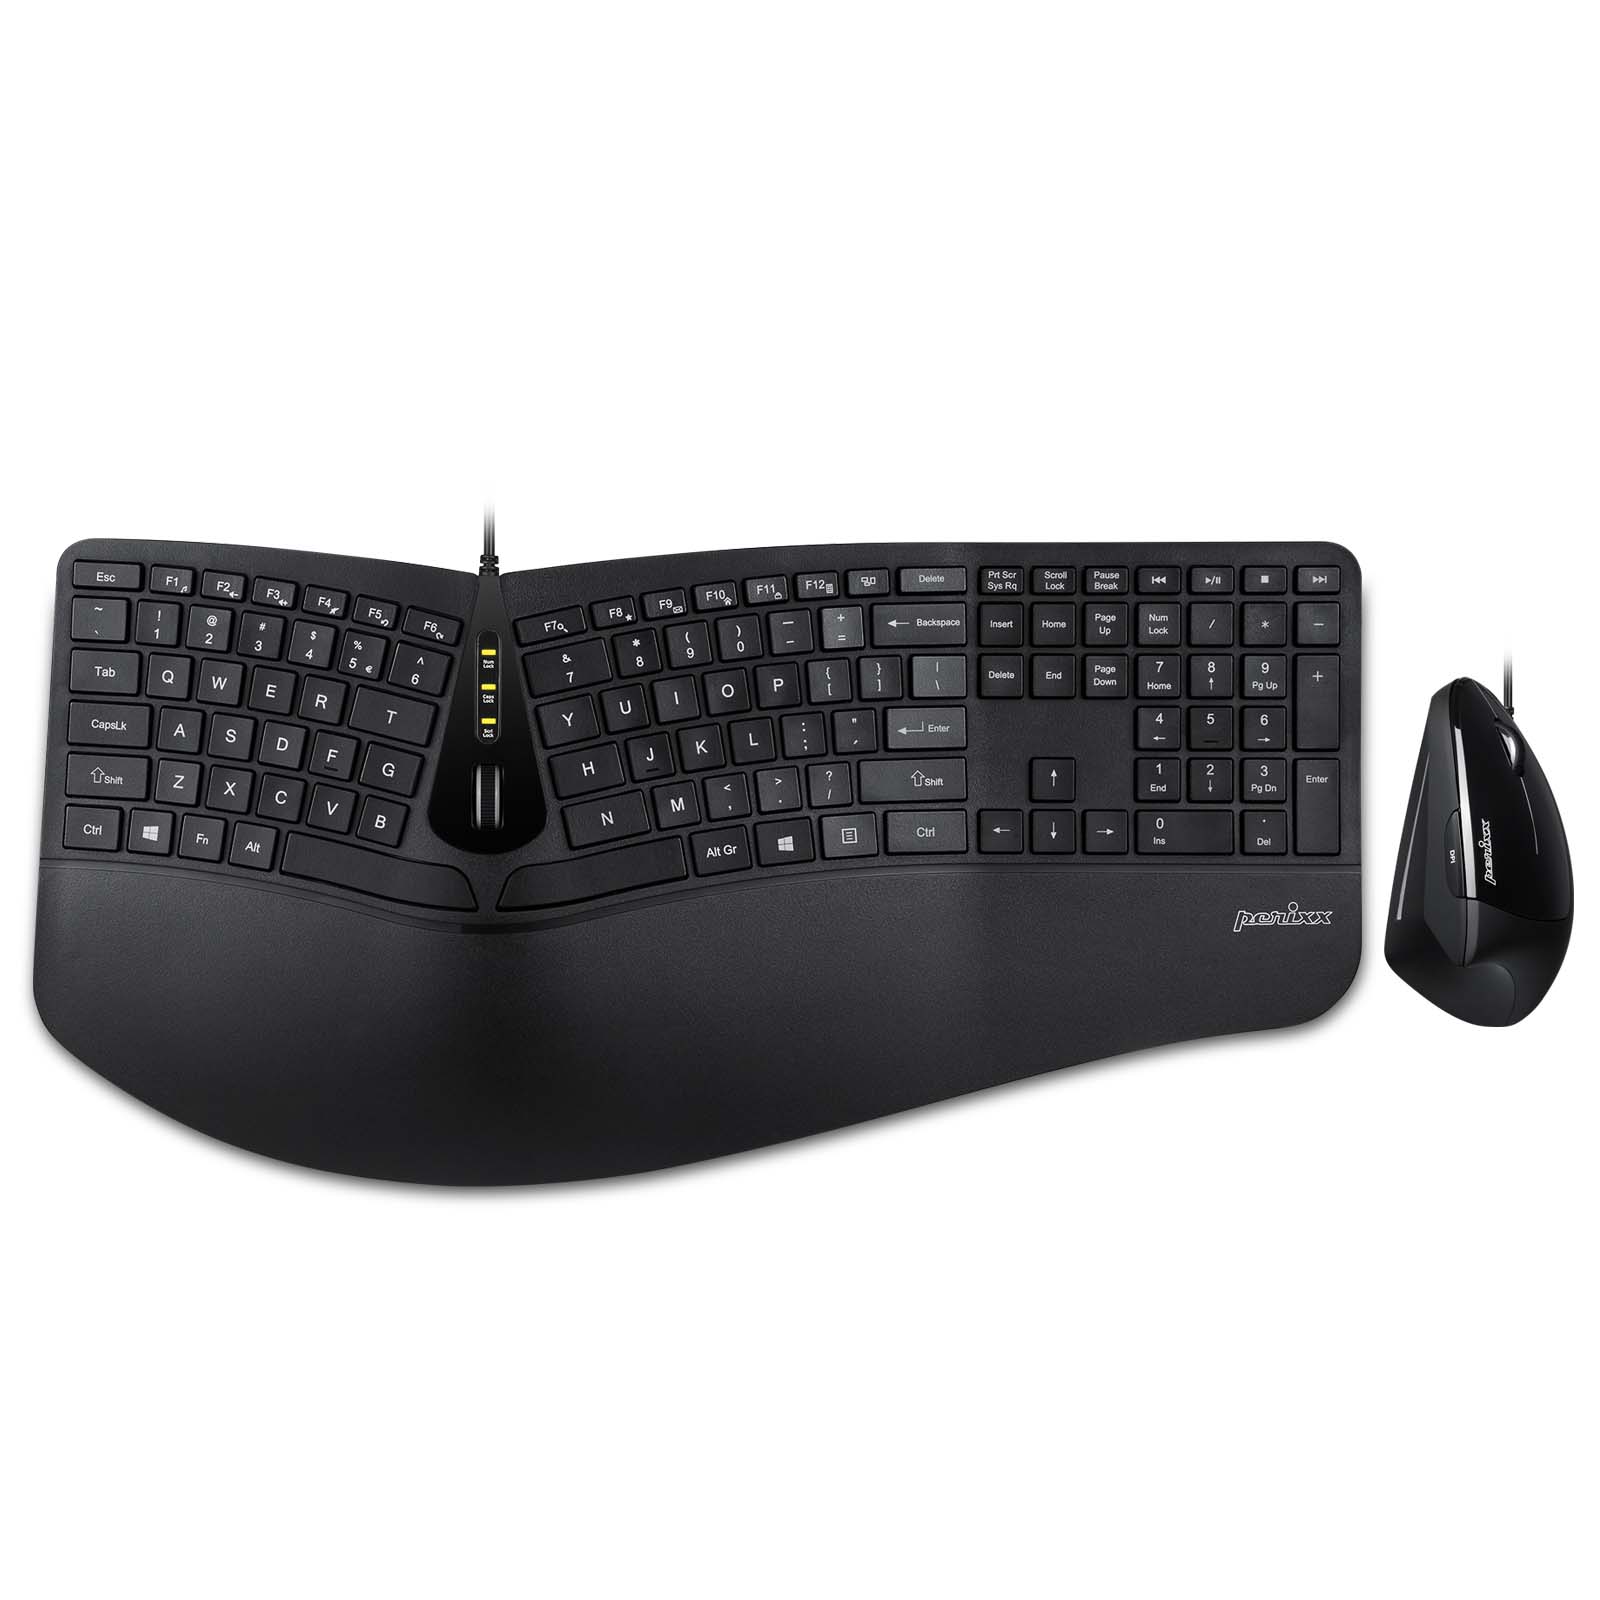 All-in-One ergonomic keyboard and mouse set